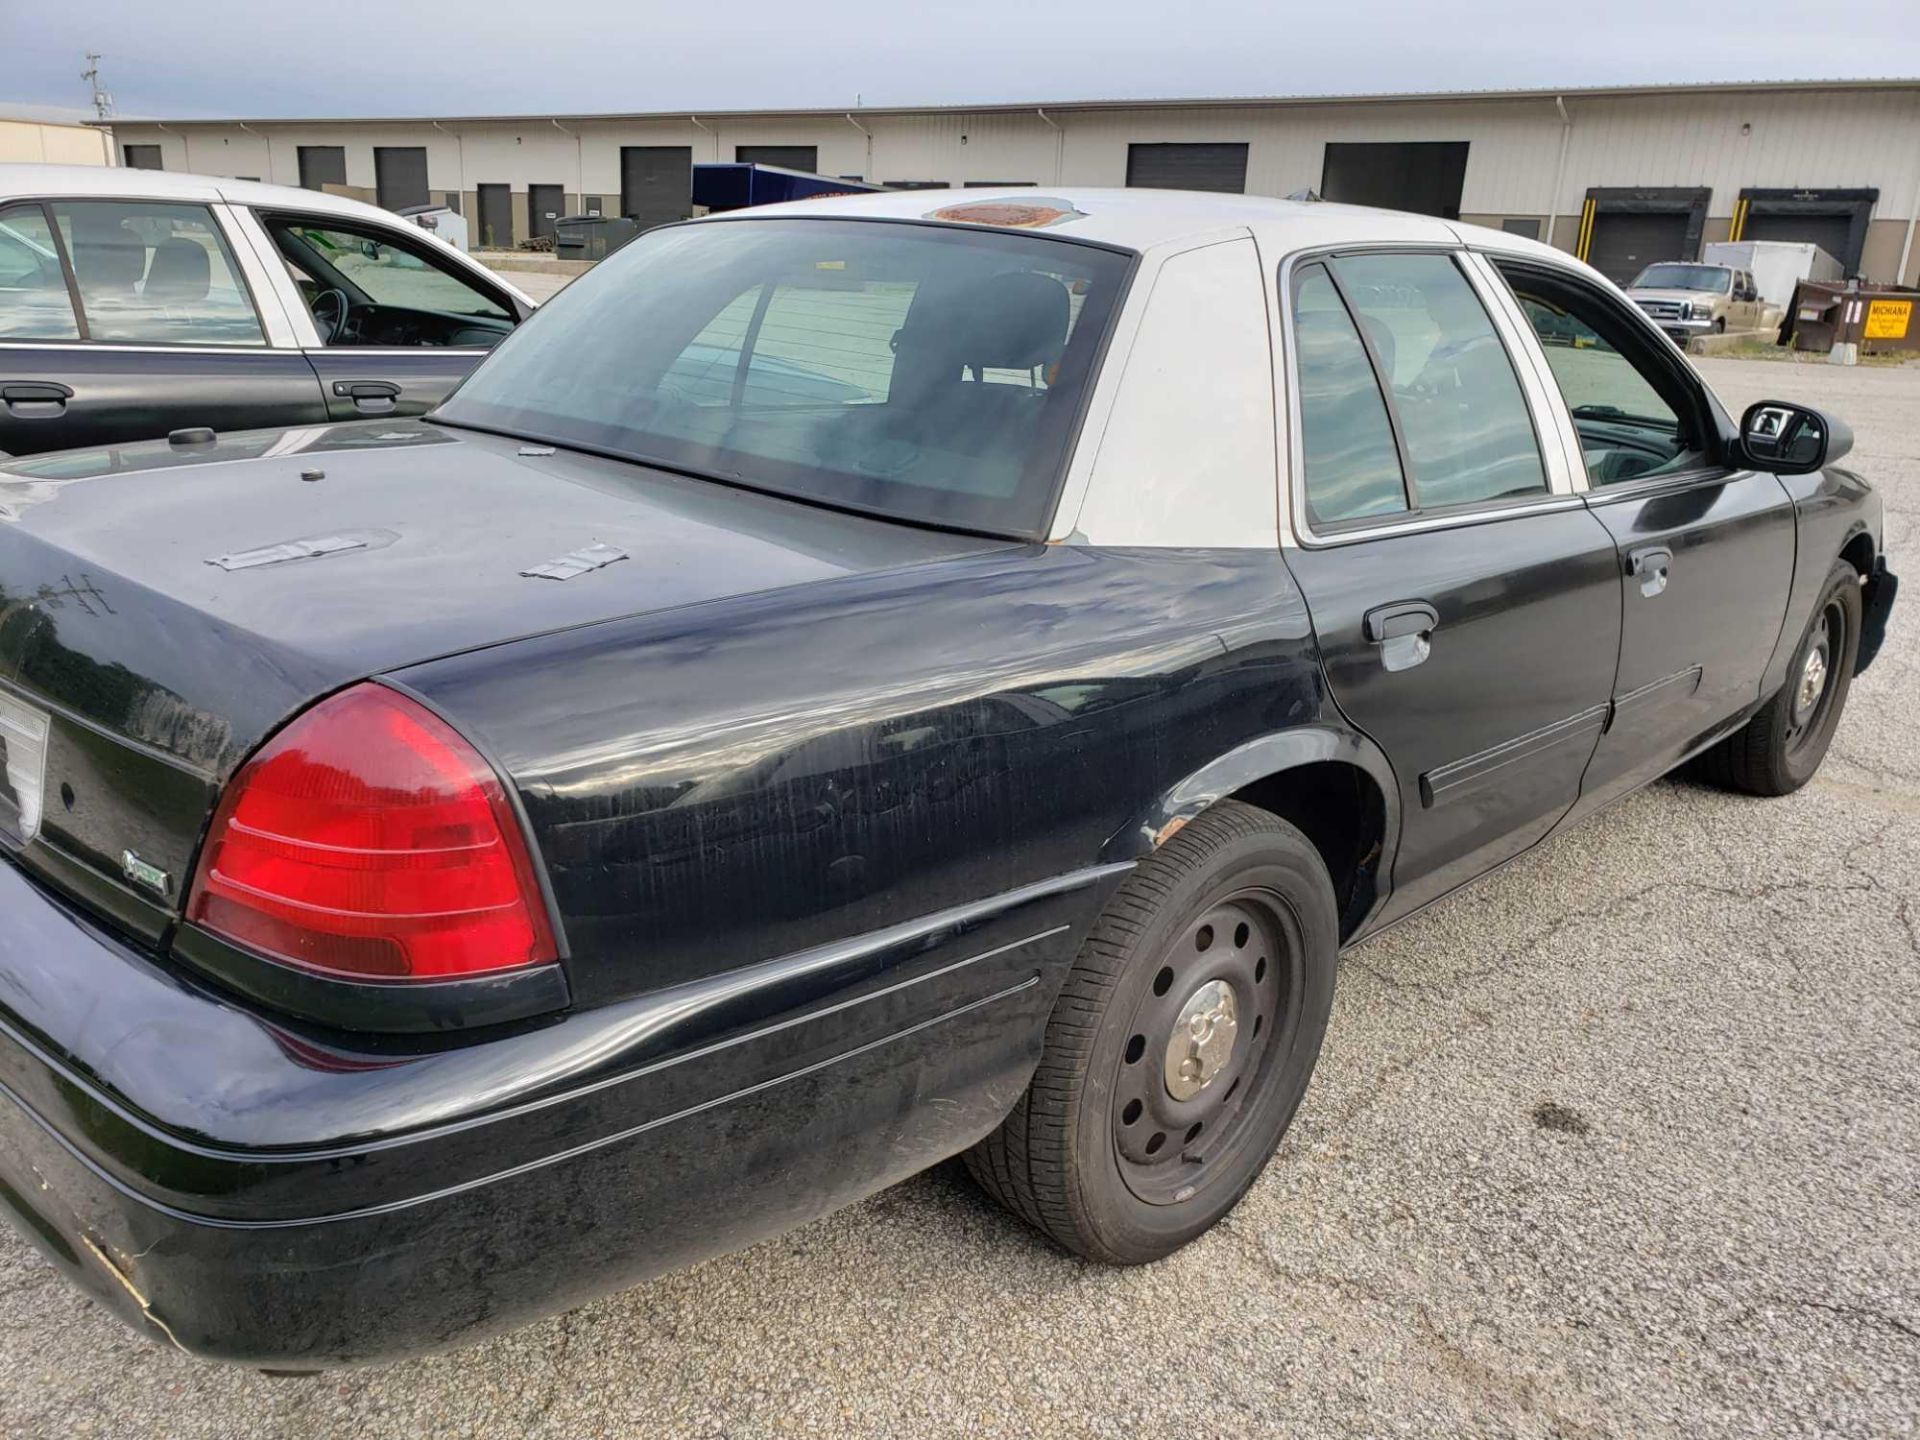 008 Ford Crown Victoria. VIN 2FAHP71V09X112075. Police Interceptor. 123,233 miles showing. - Image 4 of 19